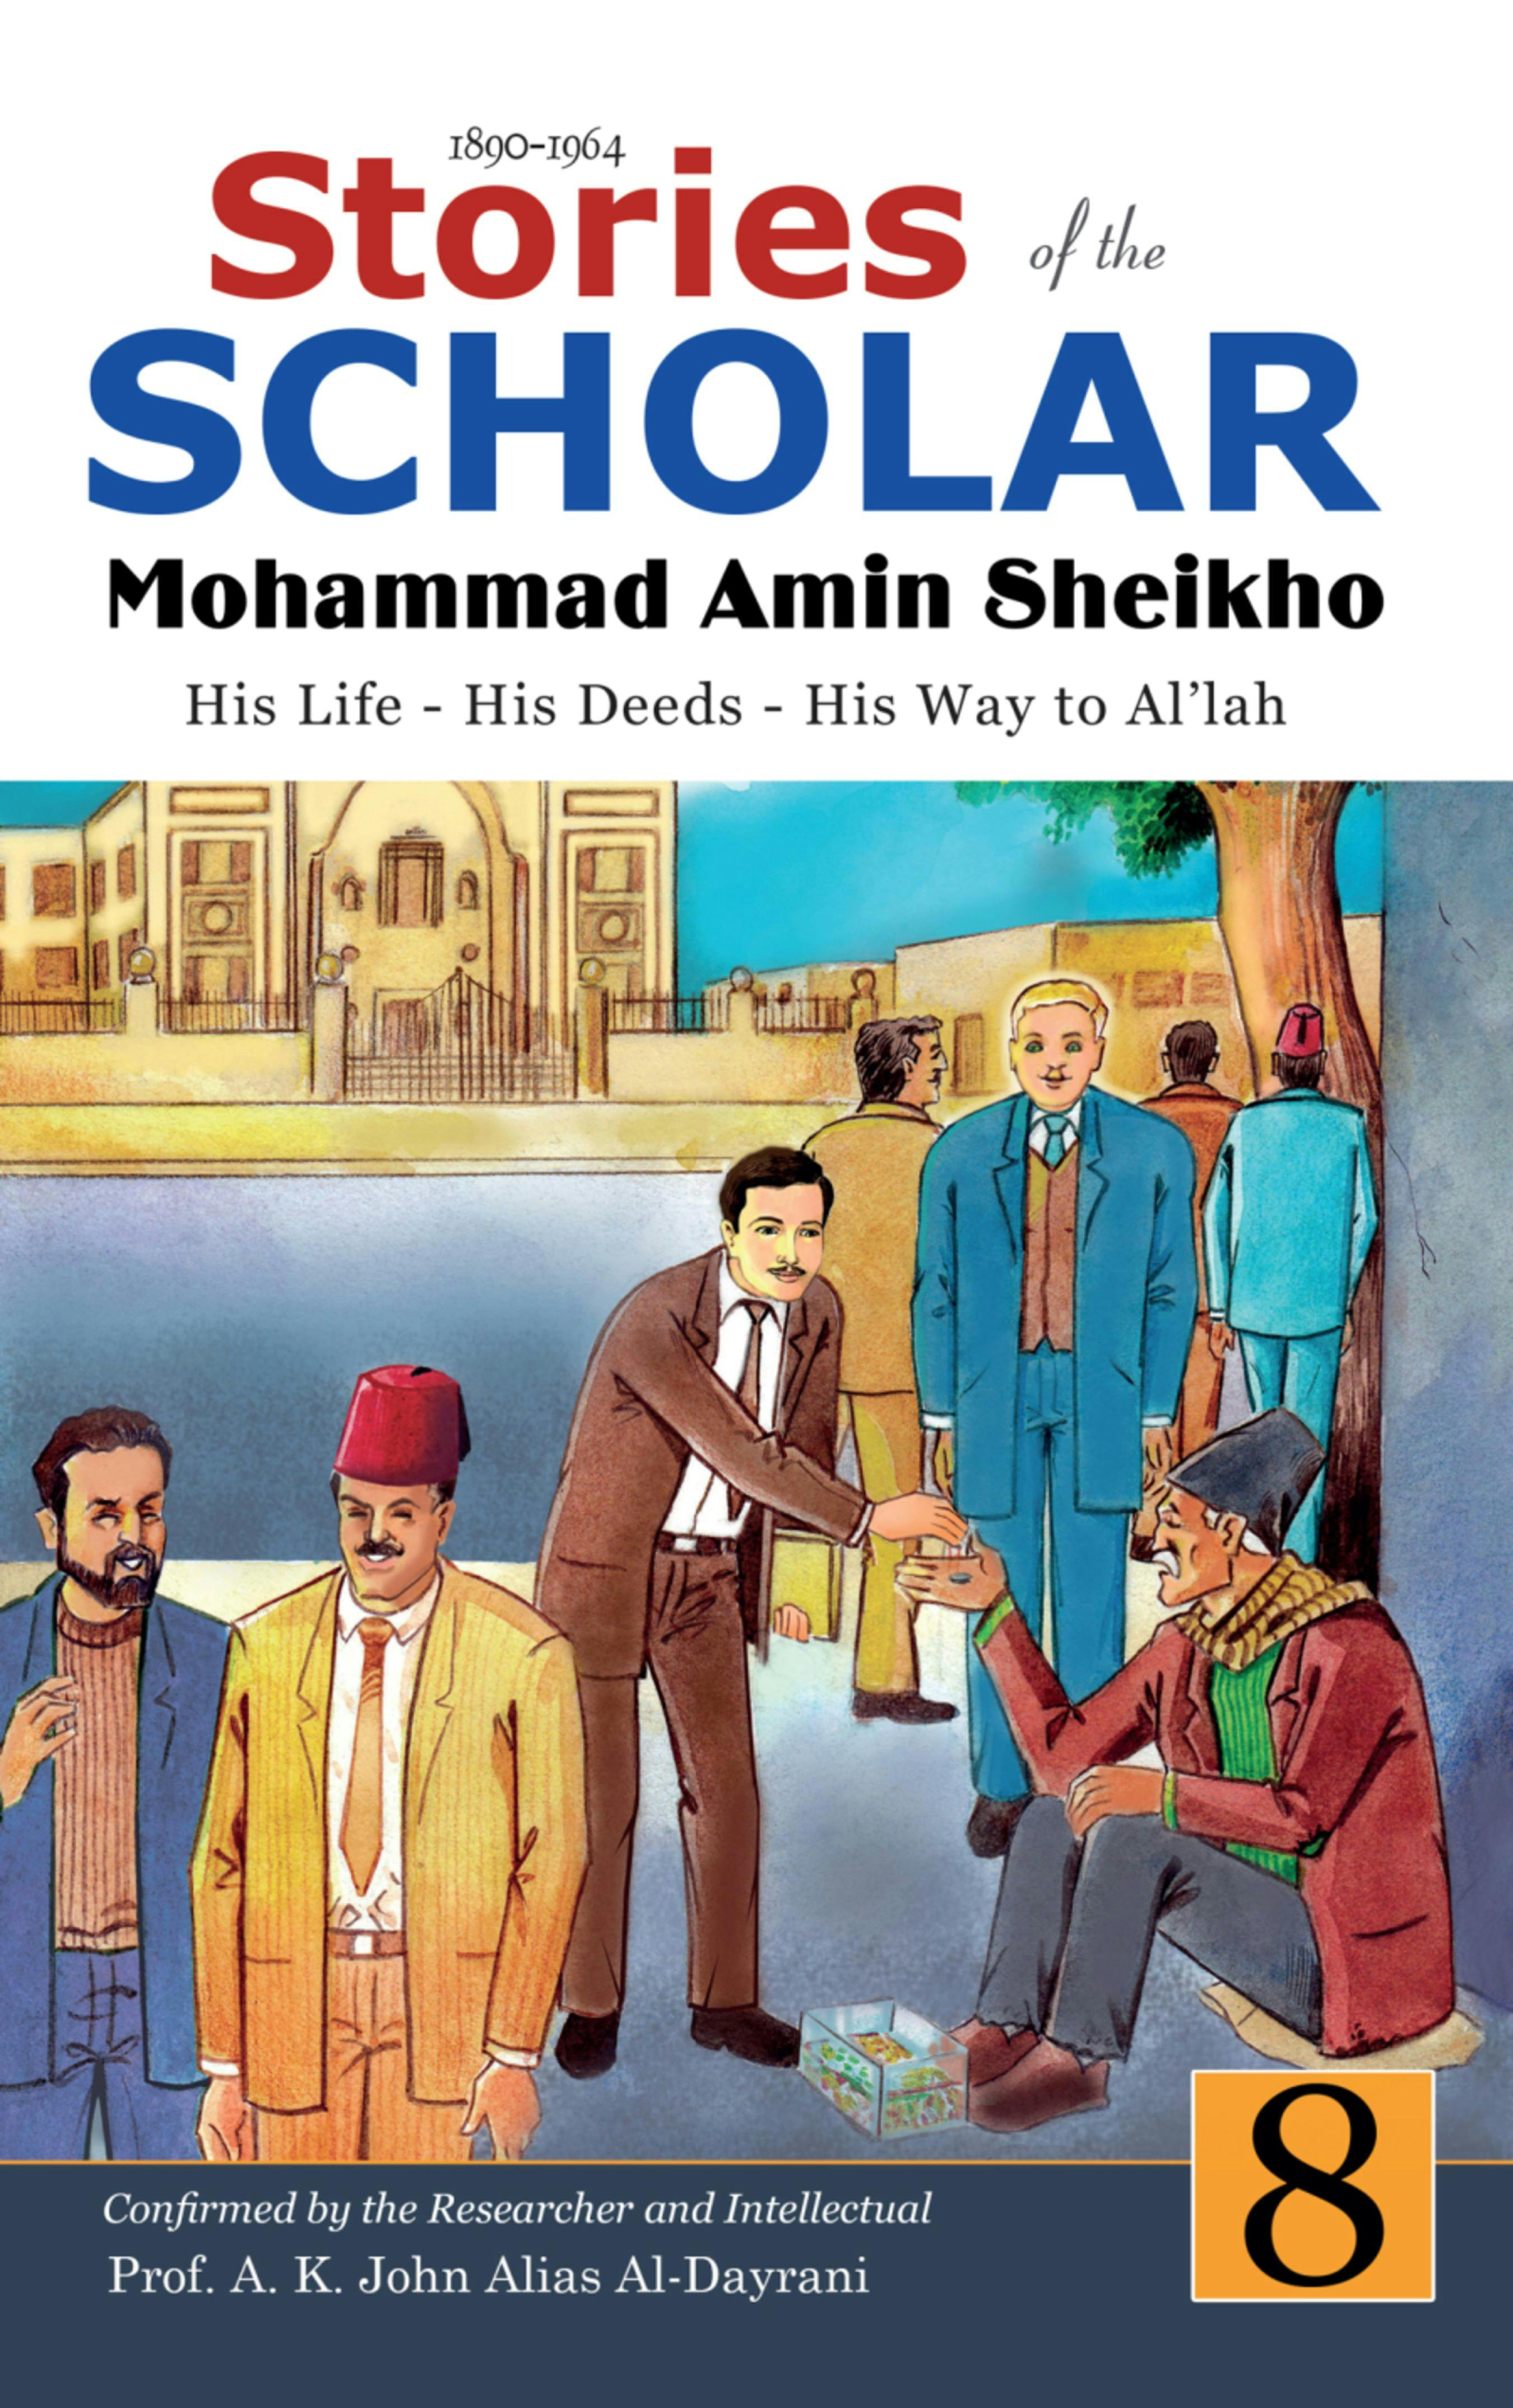 Stories of the Scholar Mohammad Amin Sheikho - Part Eight: His Life, His Deeds, His Way to Al'lah - A. K. John Alias Al-Dayrani, Mohammad Amin Sheikho